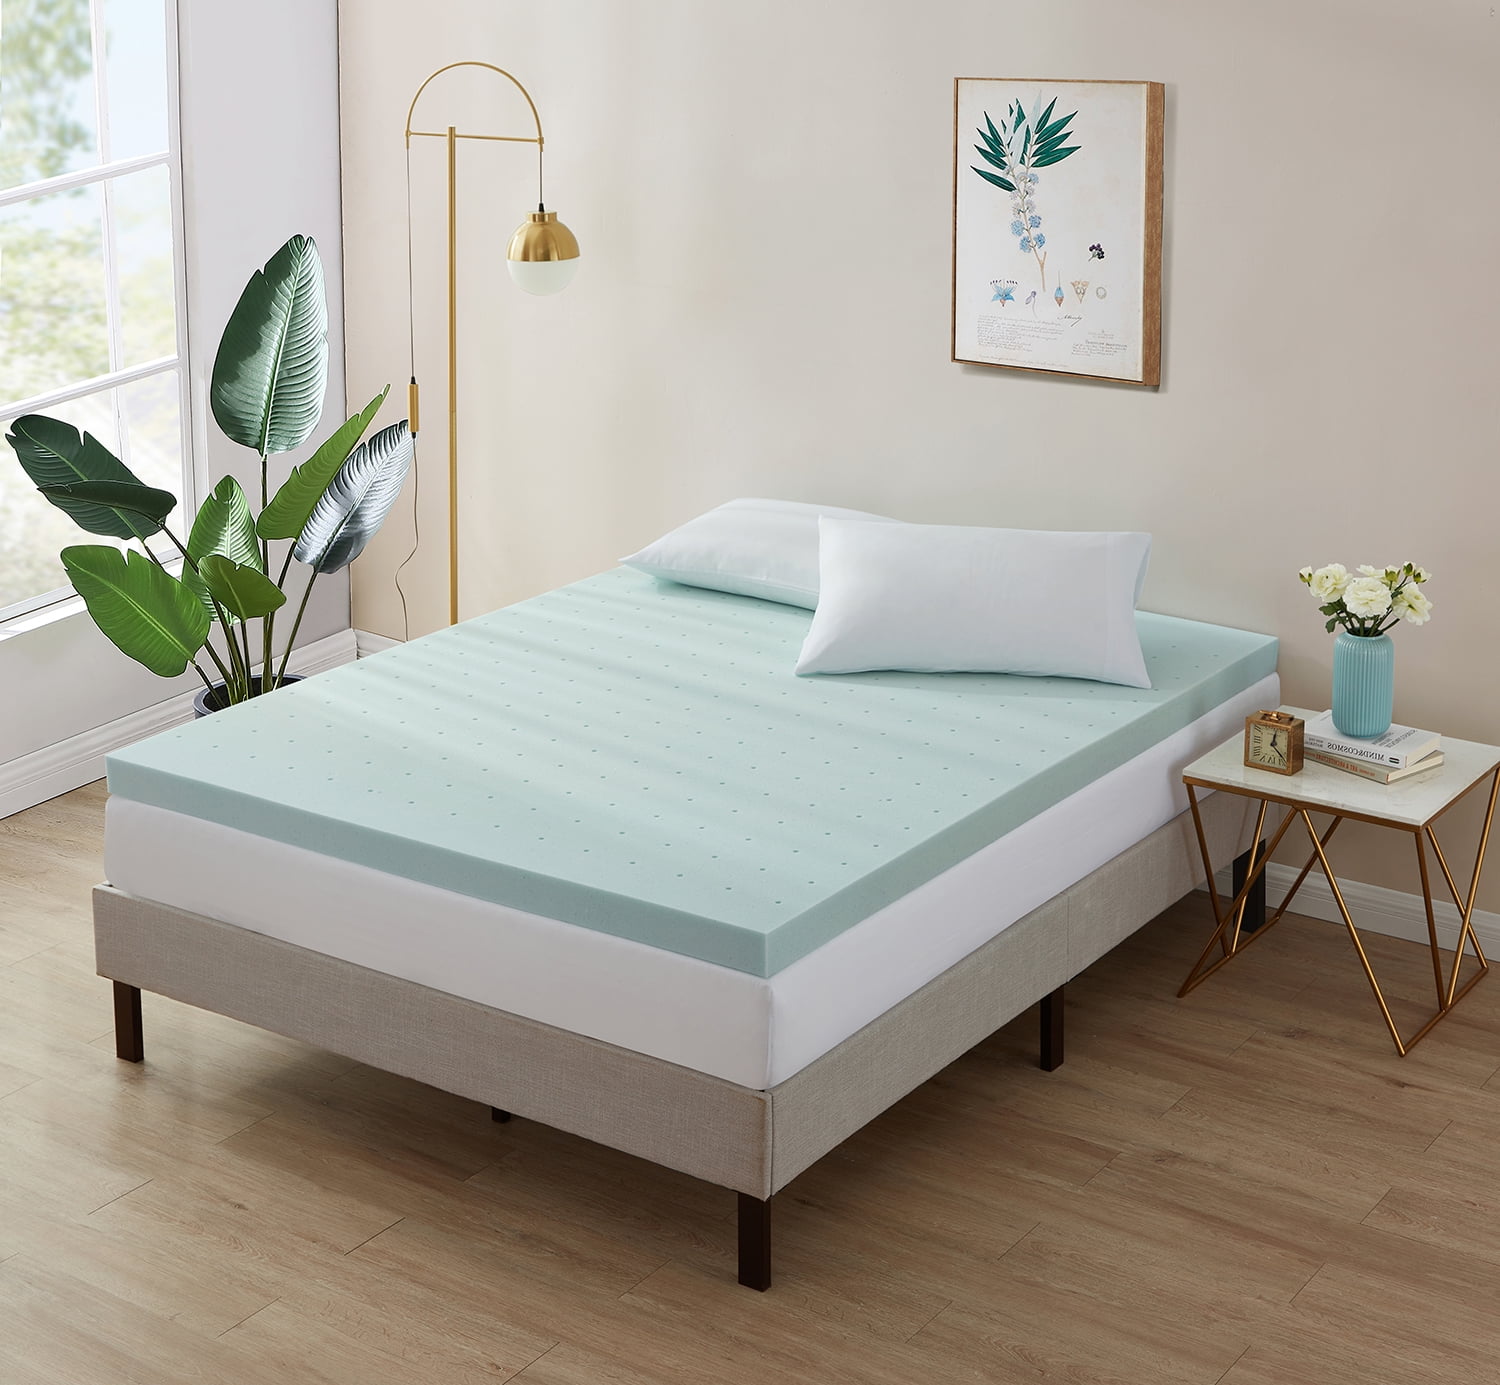 Details about   Best Price Mattress 1.5 Inch Cooling Gel Ventilated Memory Foam Topper 